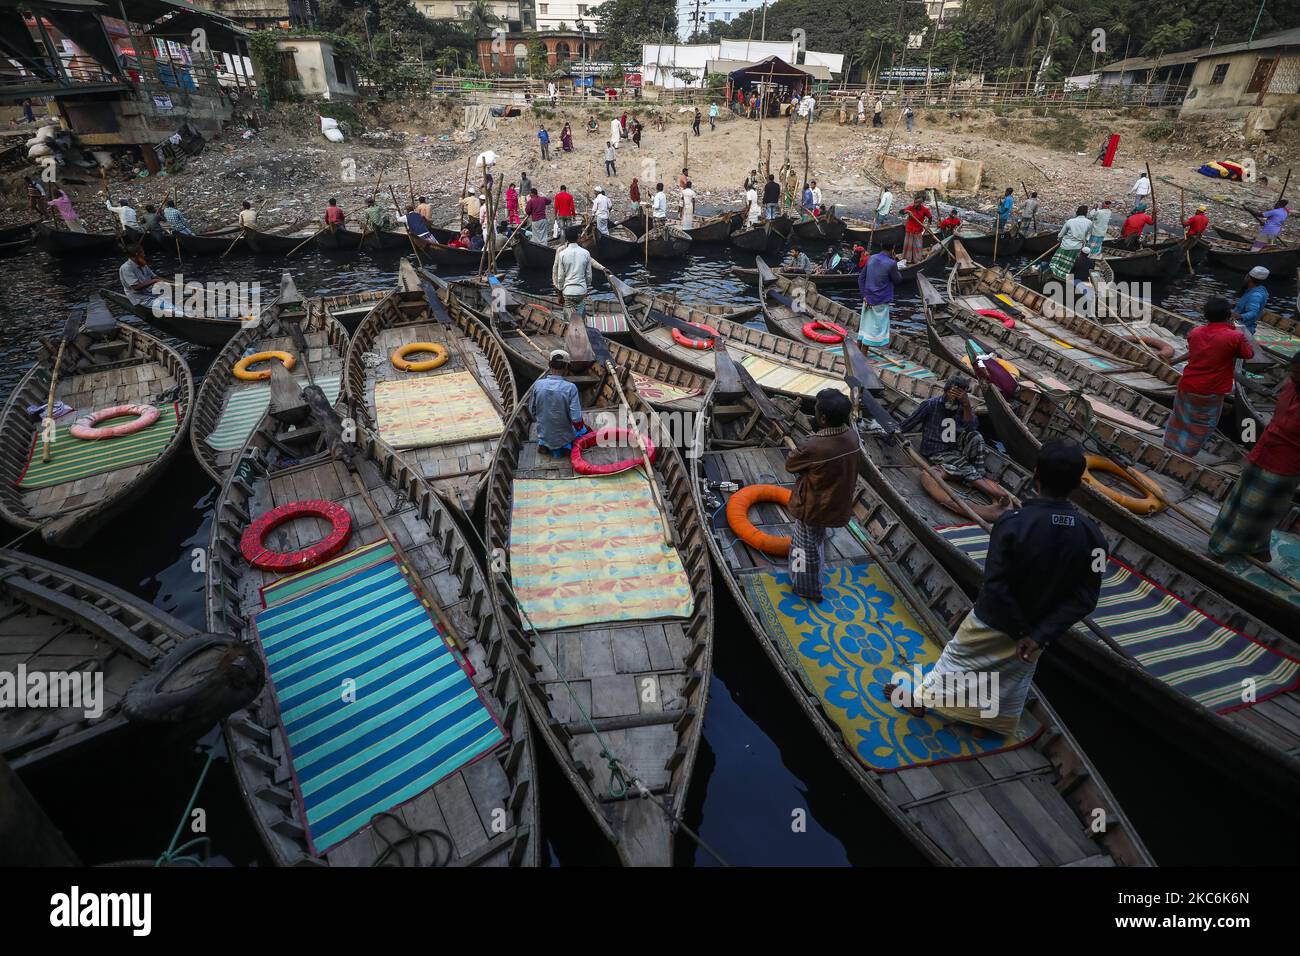 Boatmen load passengers on their boats to take them across the River Buriganga at the Sadarghat terminal in Dhaka on December 29, 2020.The Buriganga is economically a very important river for the capital. Launches and boats connect the capital to other parts of this riverine country through the Buriganga. (Photo by Ahmed Salahuddin/NurPhoto) Stock Photo